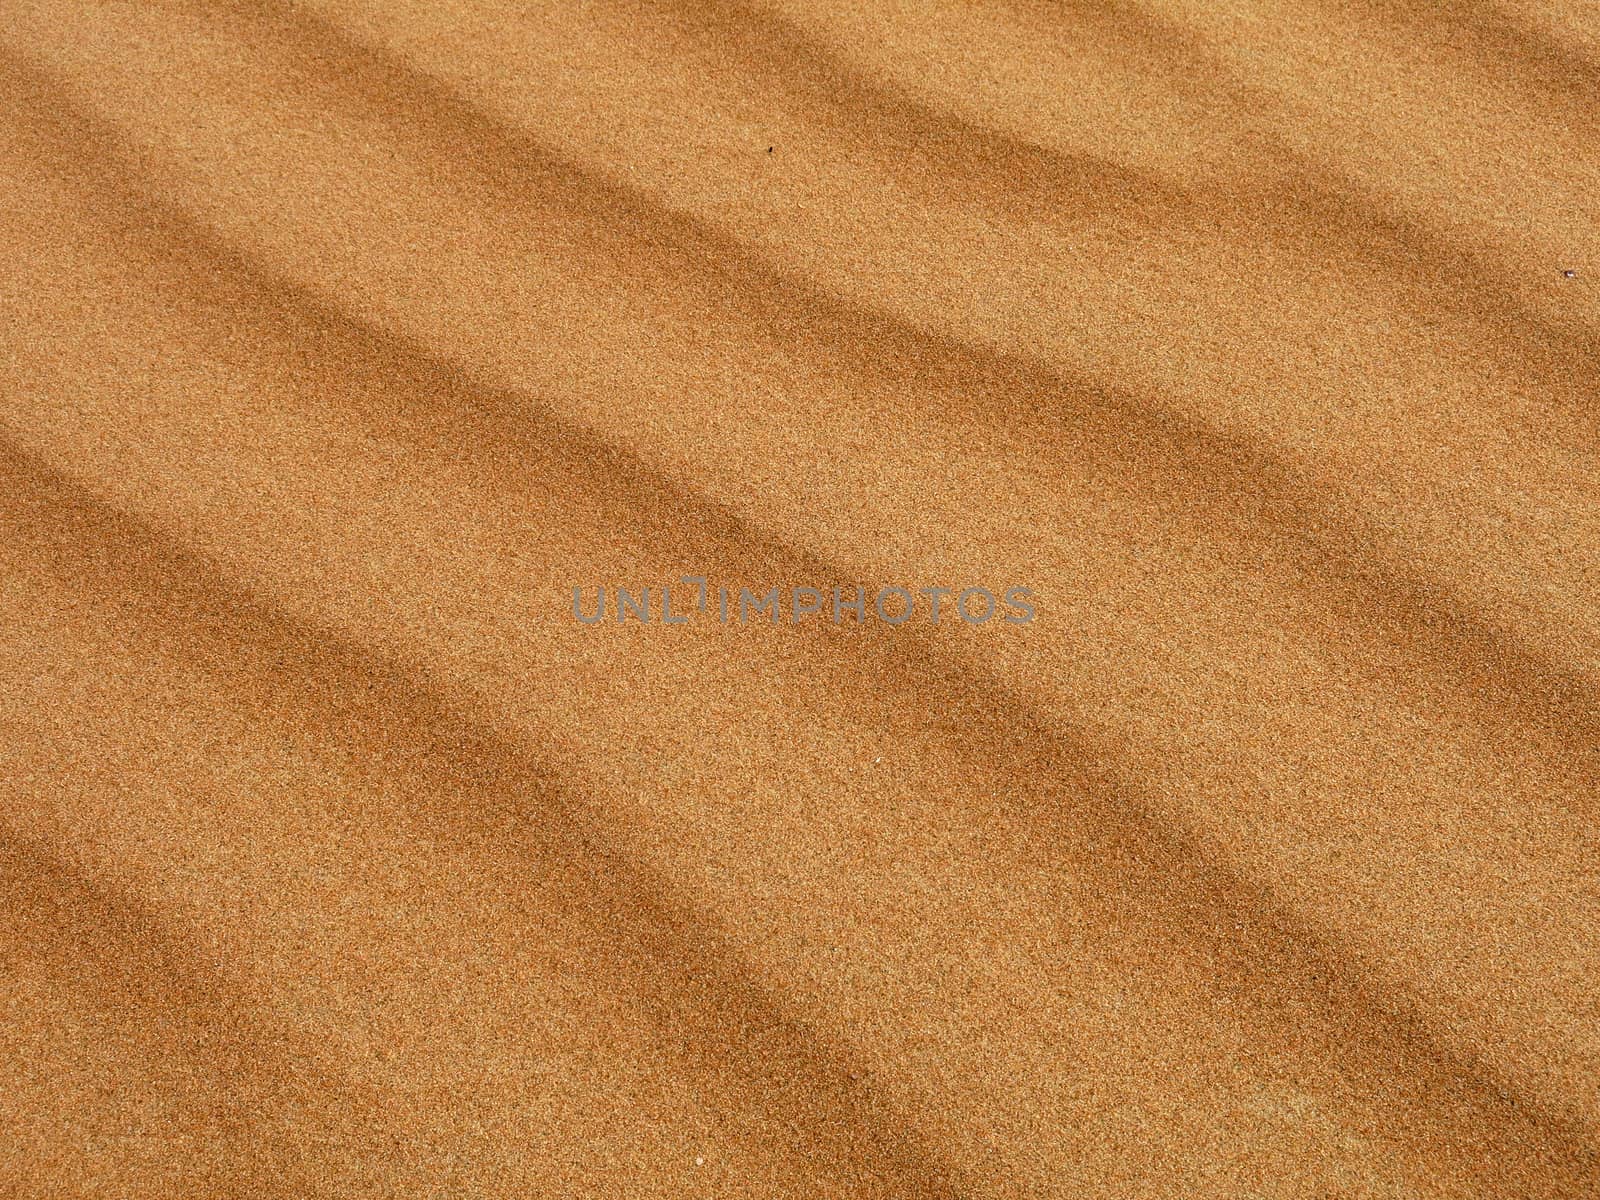 Sand from a desert on the outskirts of Dubai.